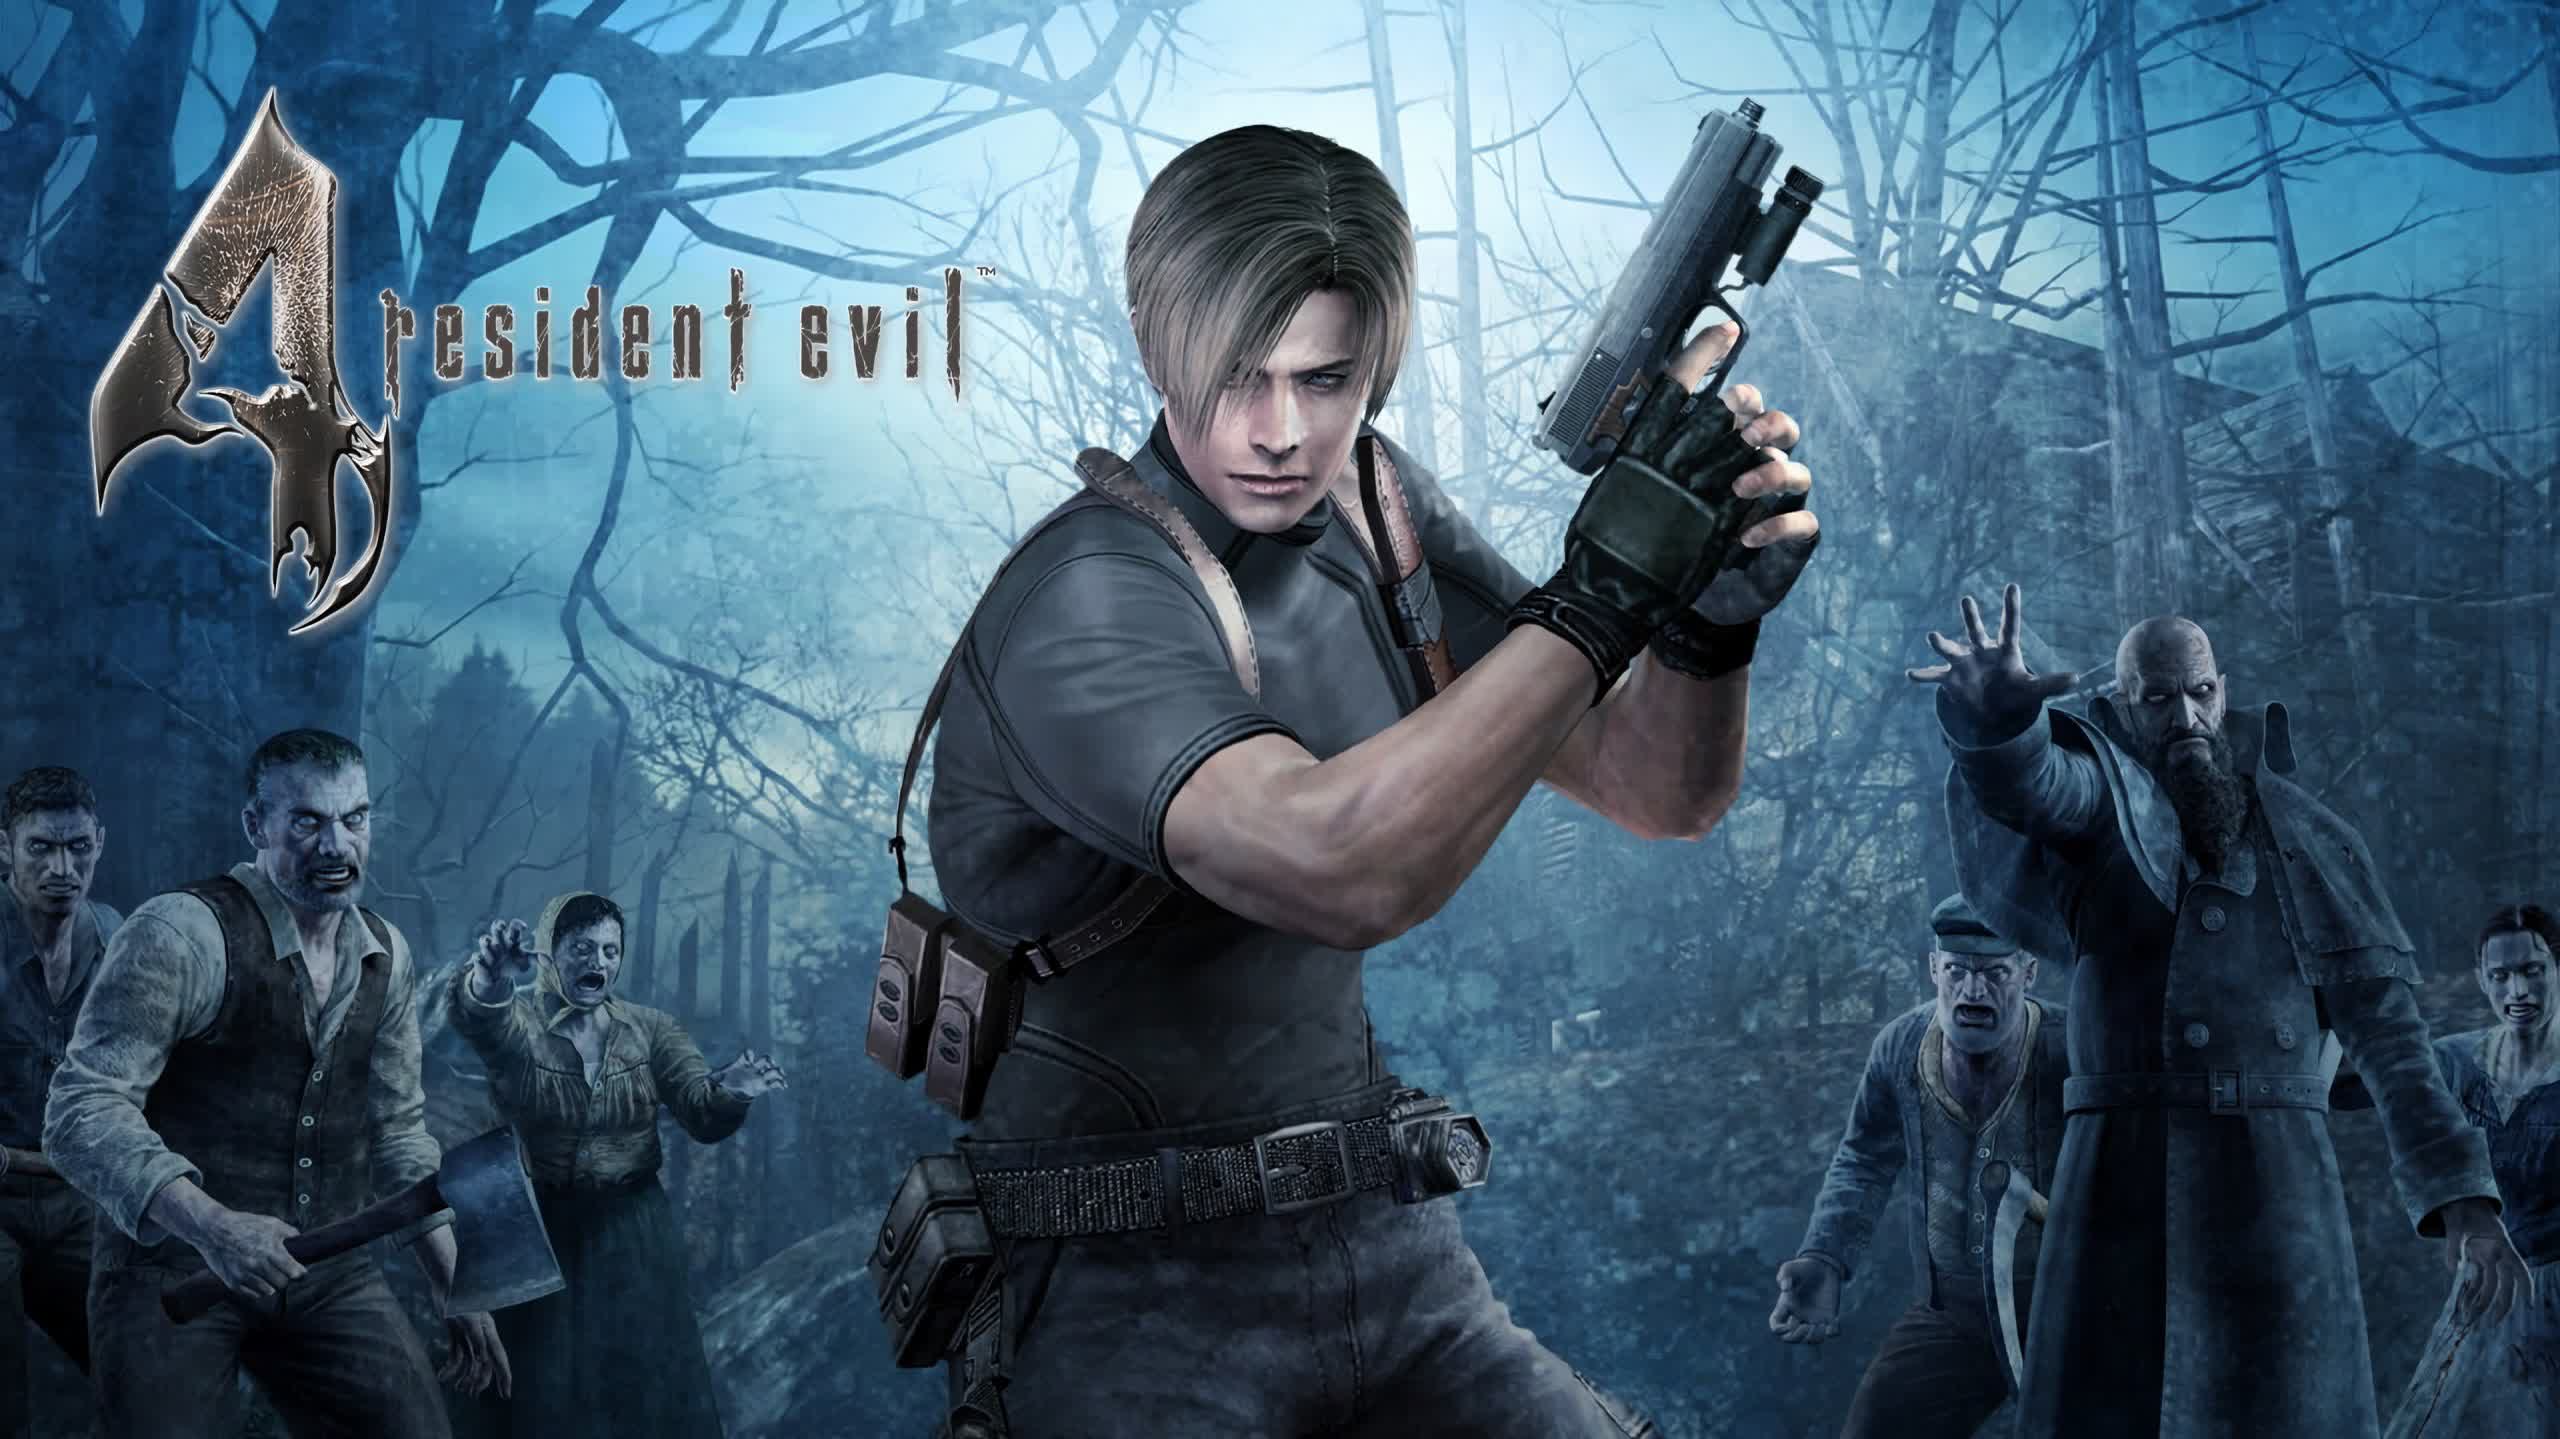 Lawsuit alleges Capcom ripped off more than 200 copyrighted textures used in DMC and RE4